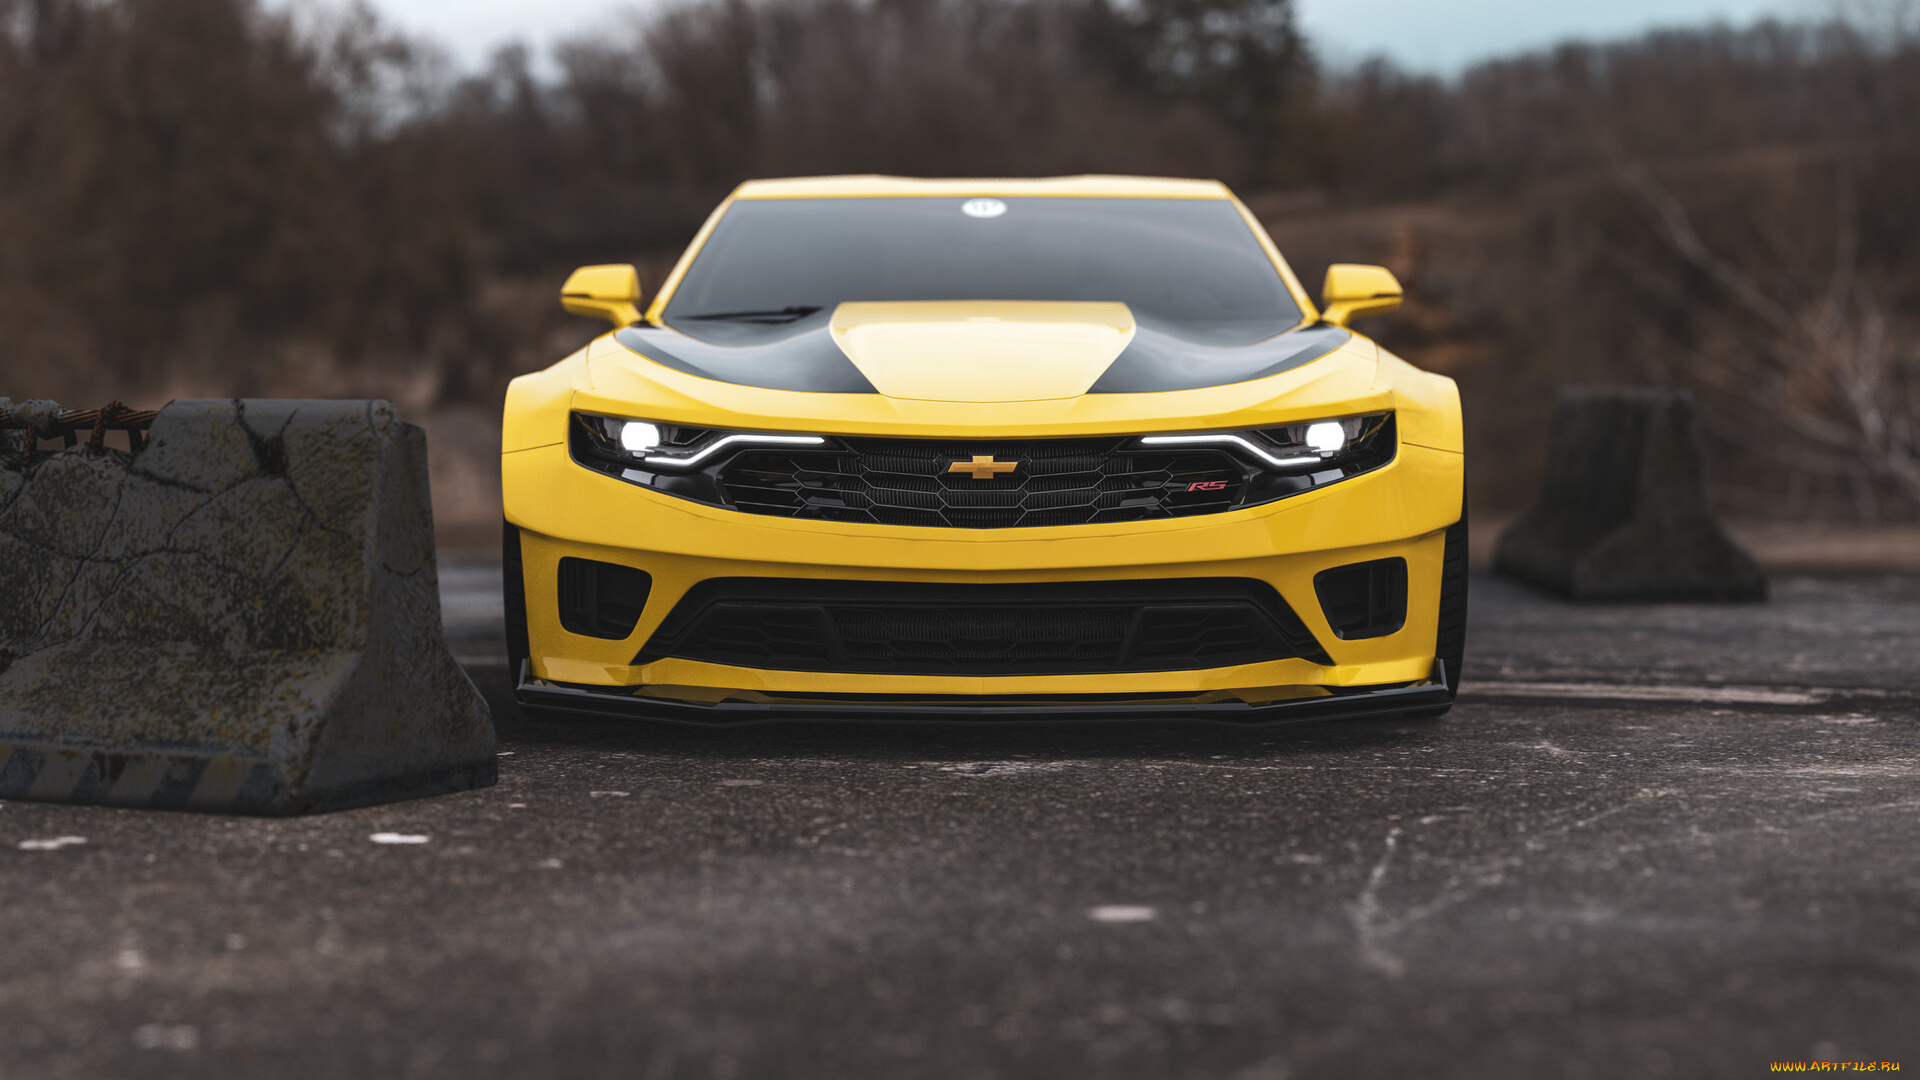 chevrolet, camaro, rs, bumble, bee, new, vision, автомобили, 3д, chevrolet, camaro, rs, bumble, bee, new, vision